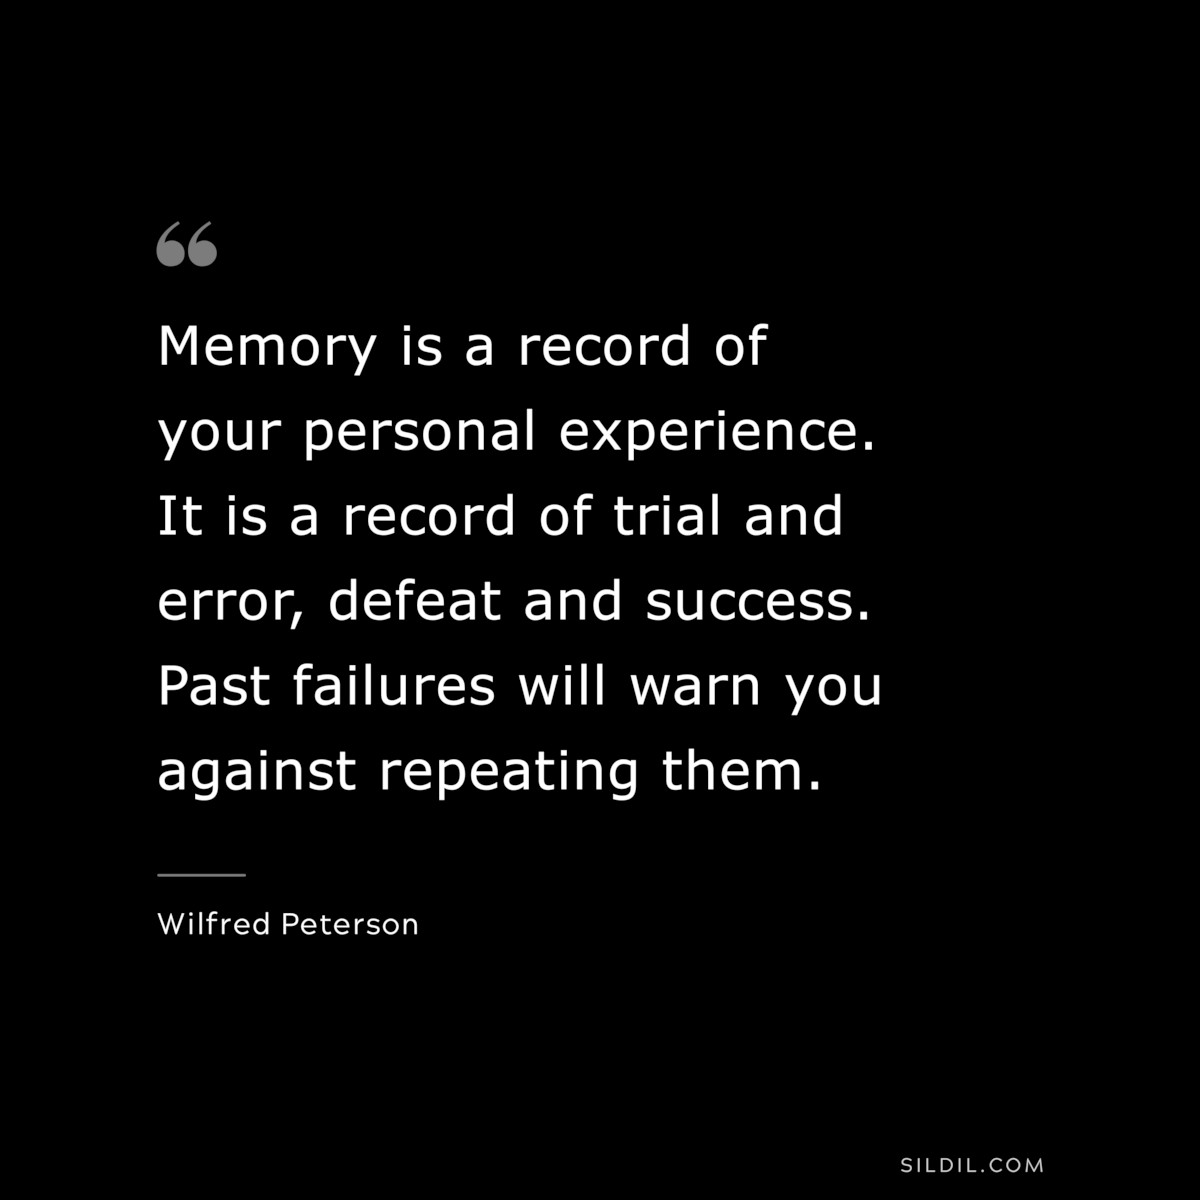 Memory is a record of your personal experience. It is a record of trial and error, defeat and success. Past failures will warn you against repeating them. ― Wilfred Peterson